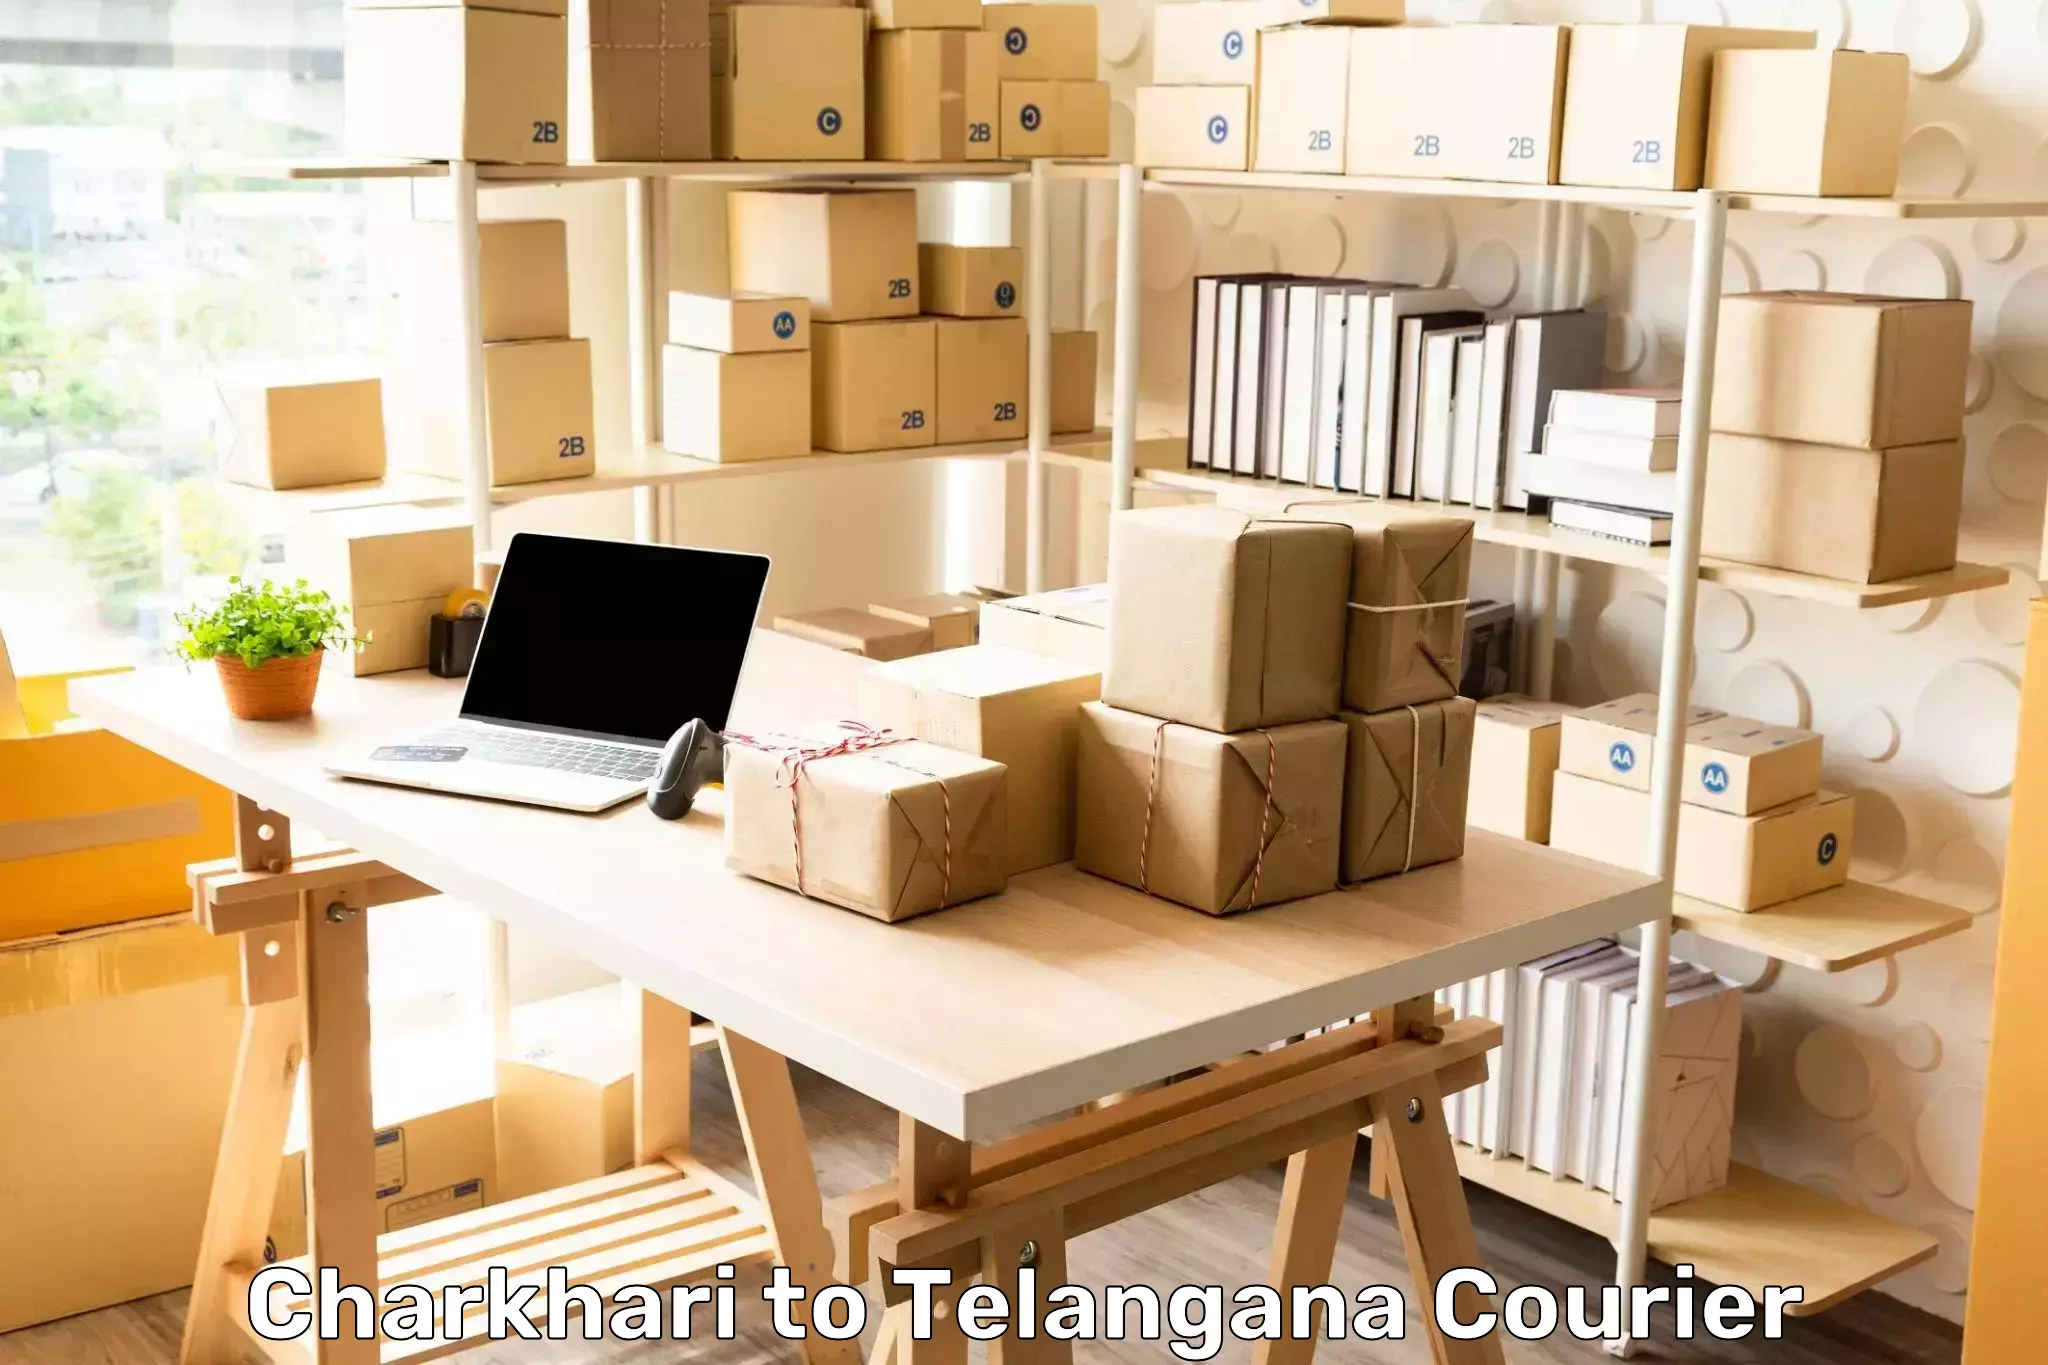 Multi-national courier services Charkhari to Mancherial